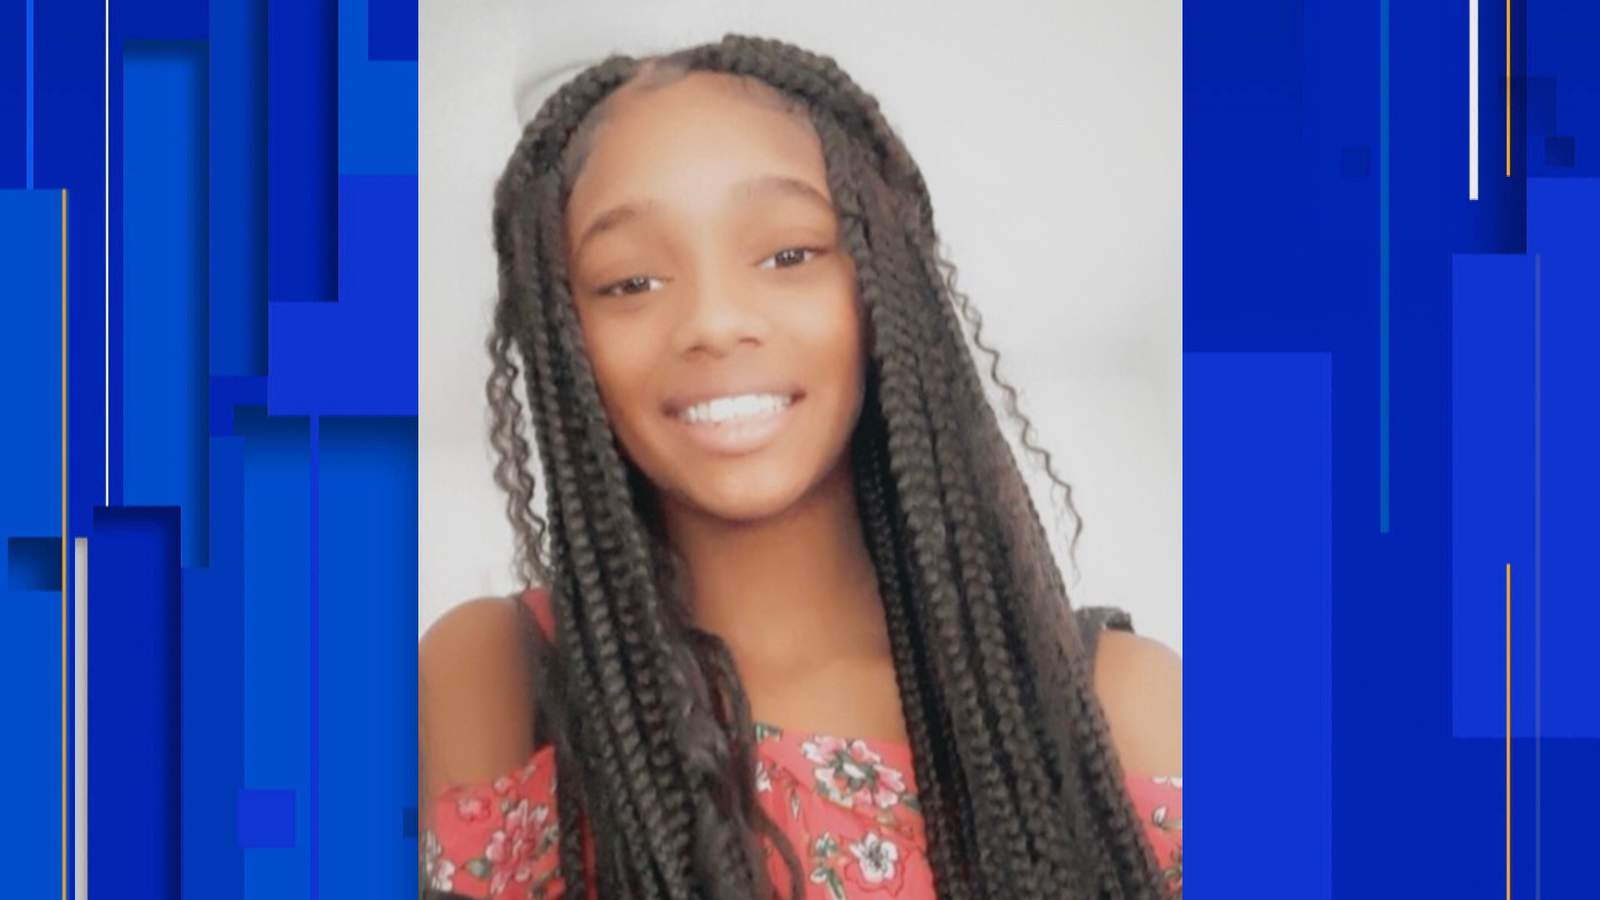 Detroit Police Want Help Finding Missing 12 Year Old Girl